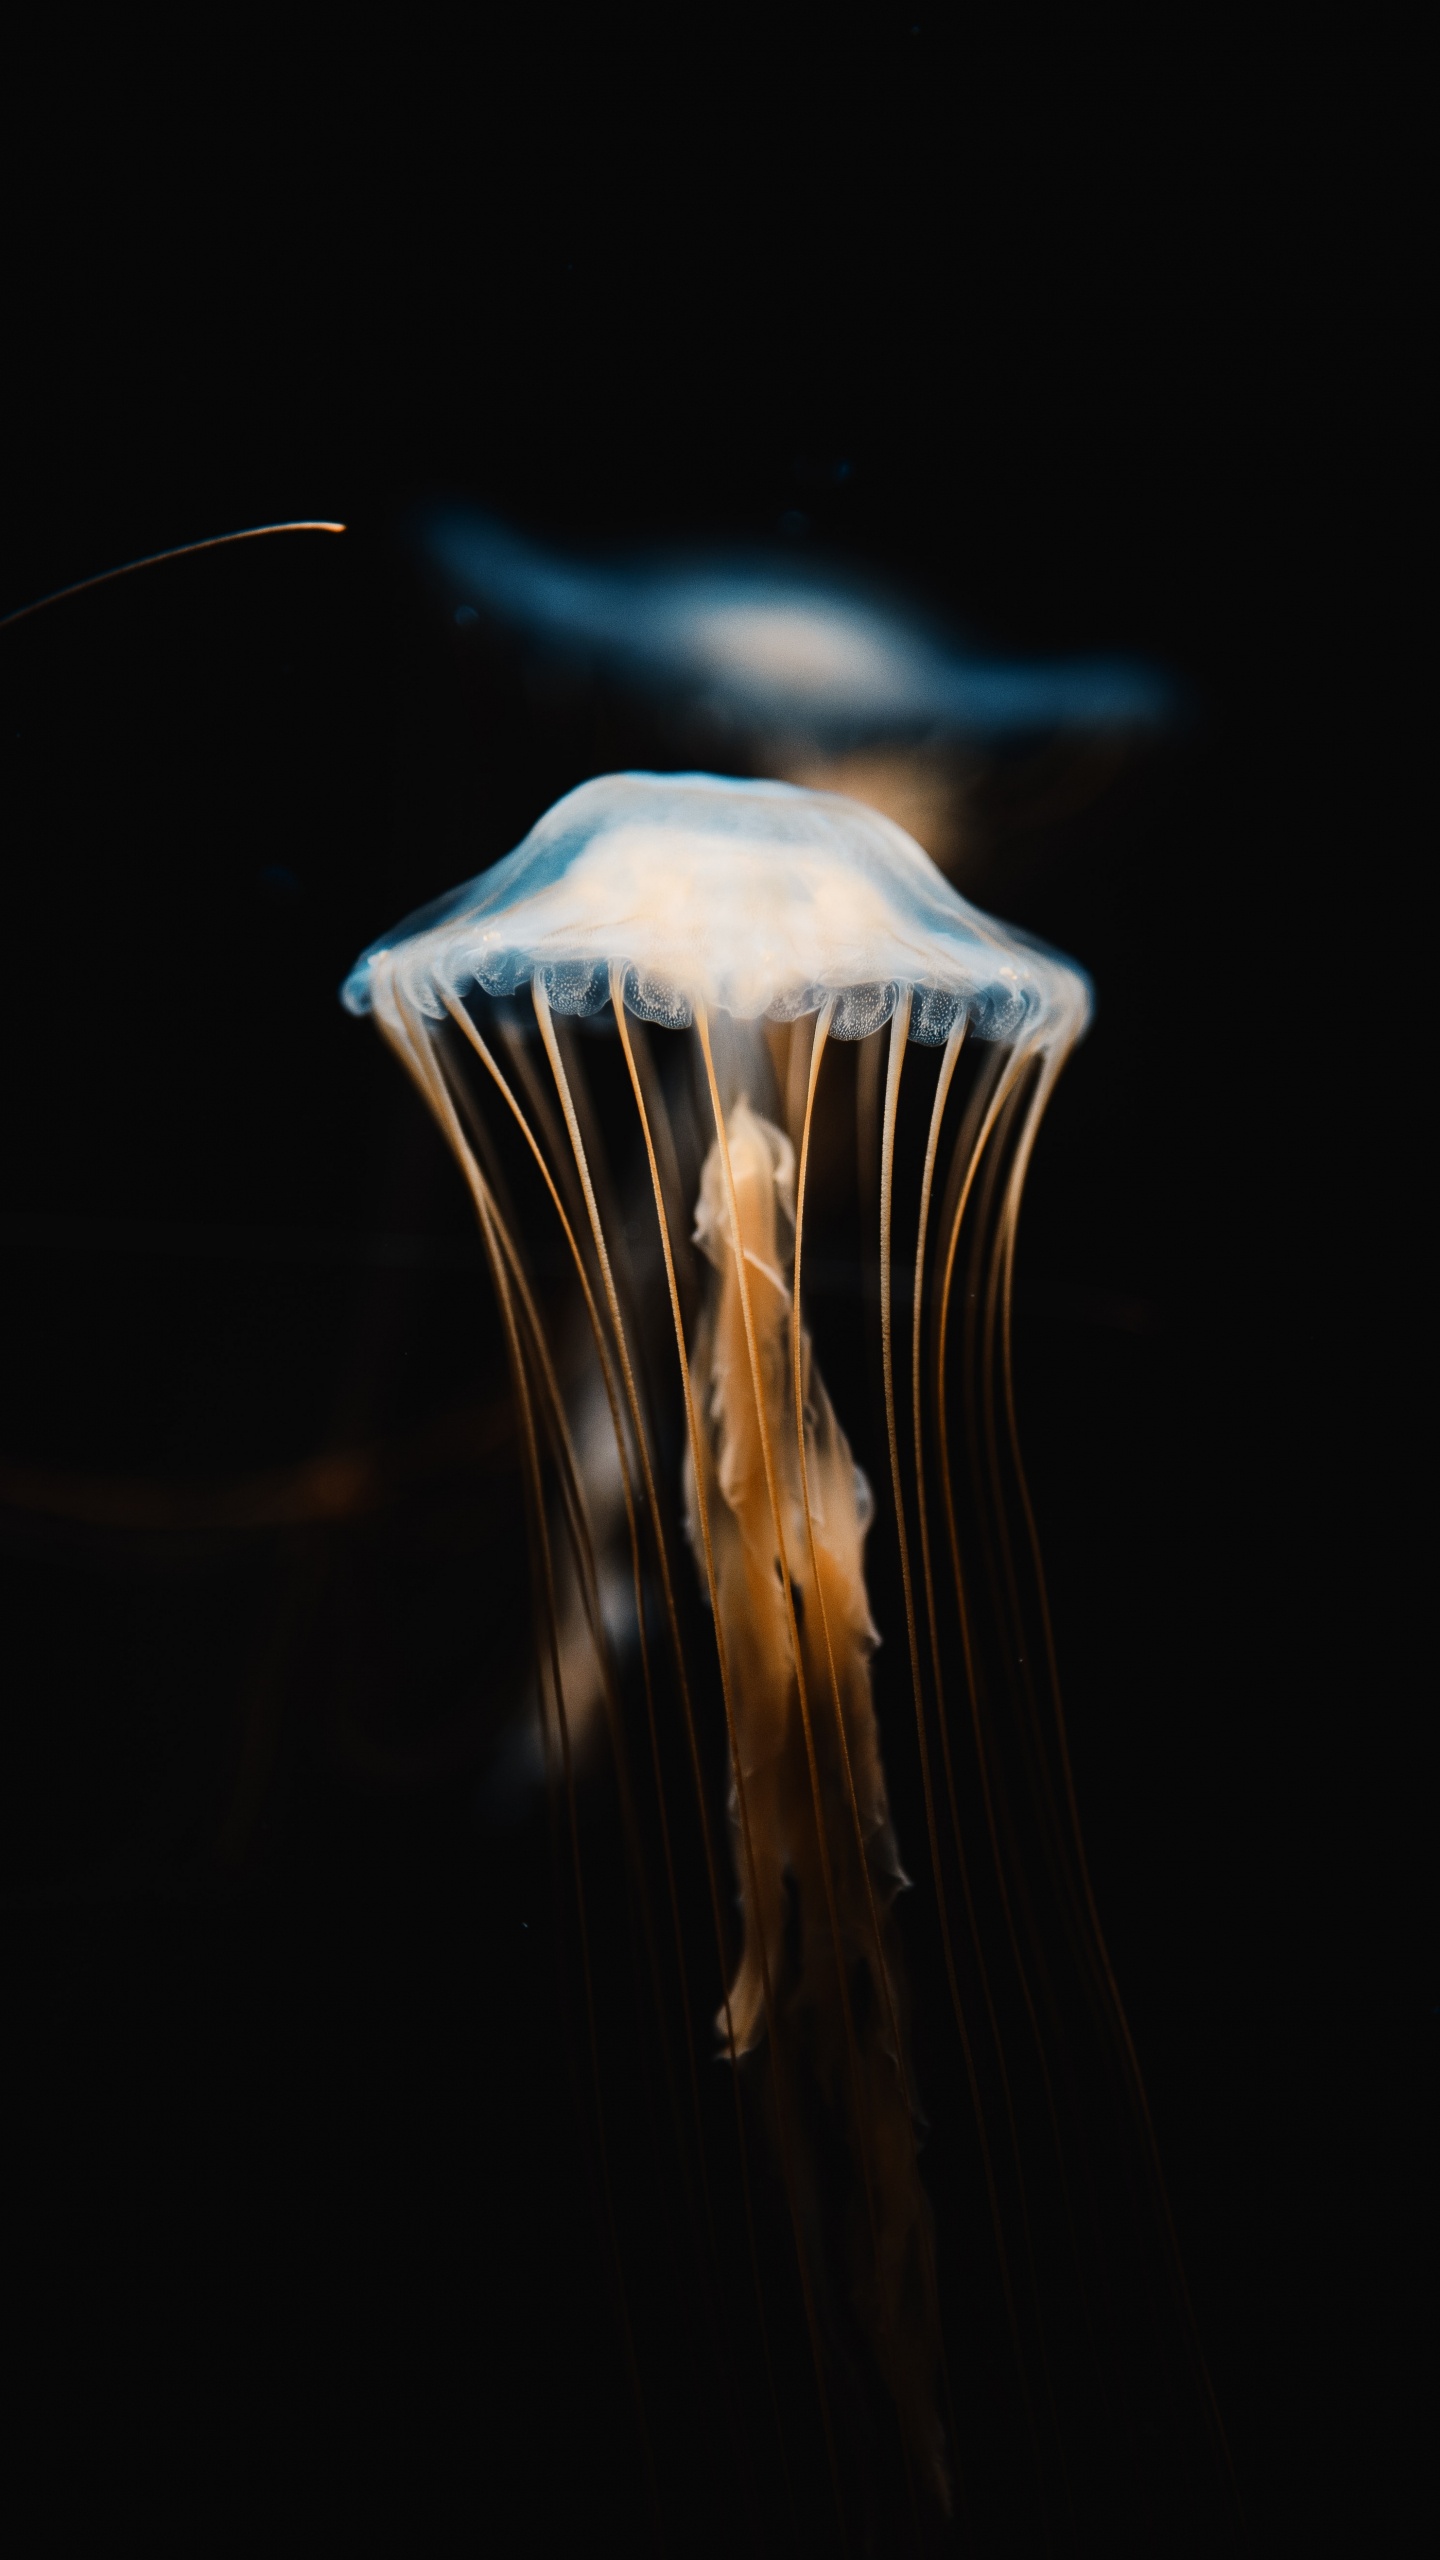 Blue and White Jellyfish in Dark Room. Wallpaper in 1440x2560 Resolution